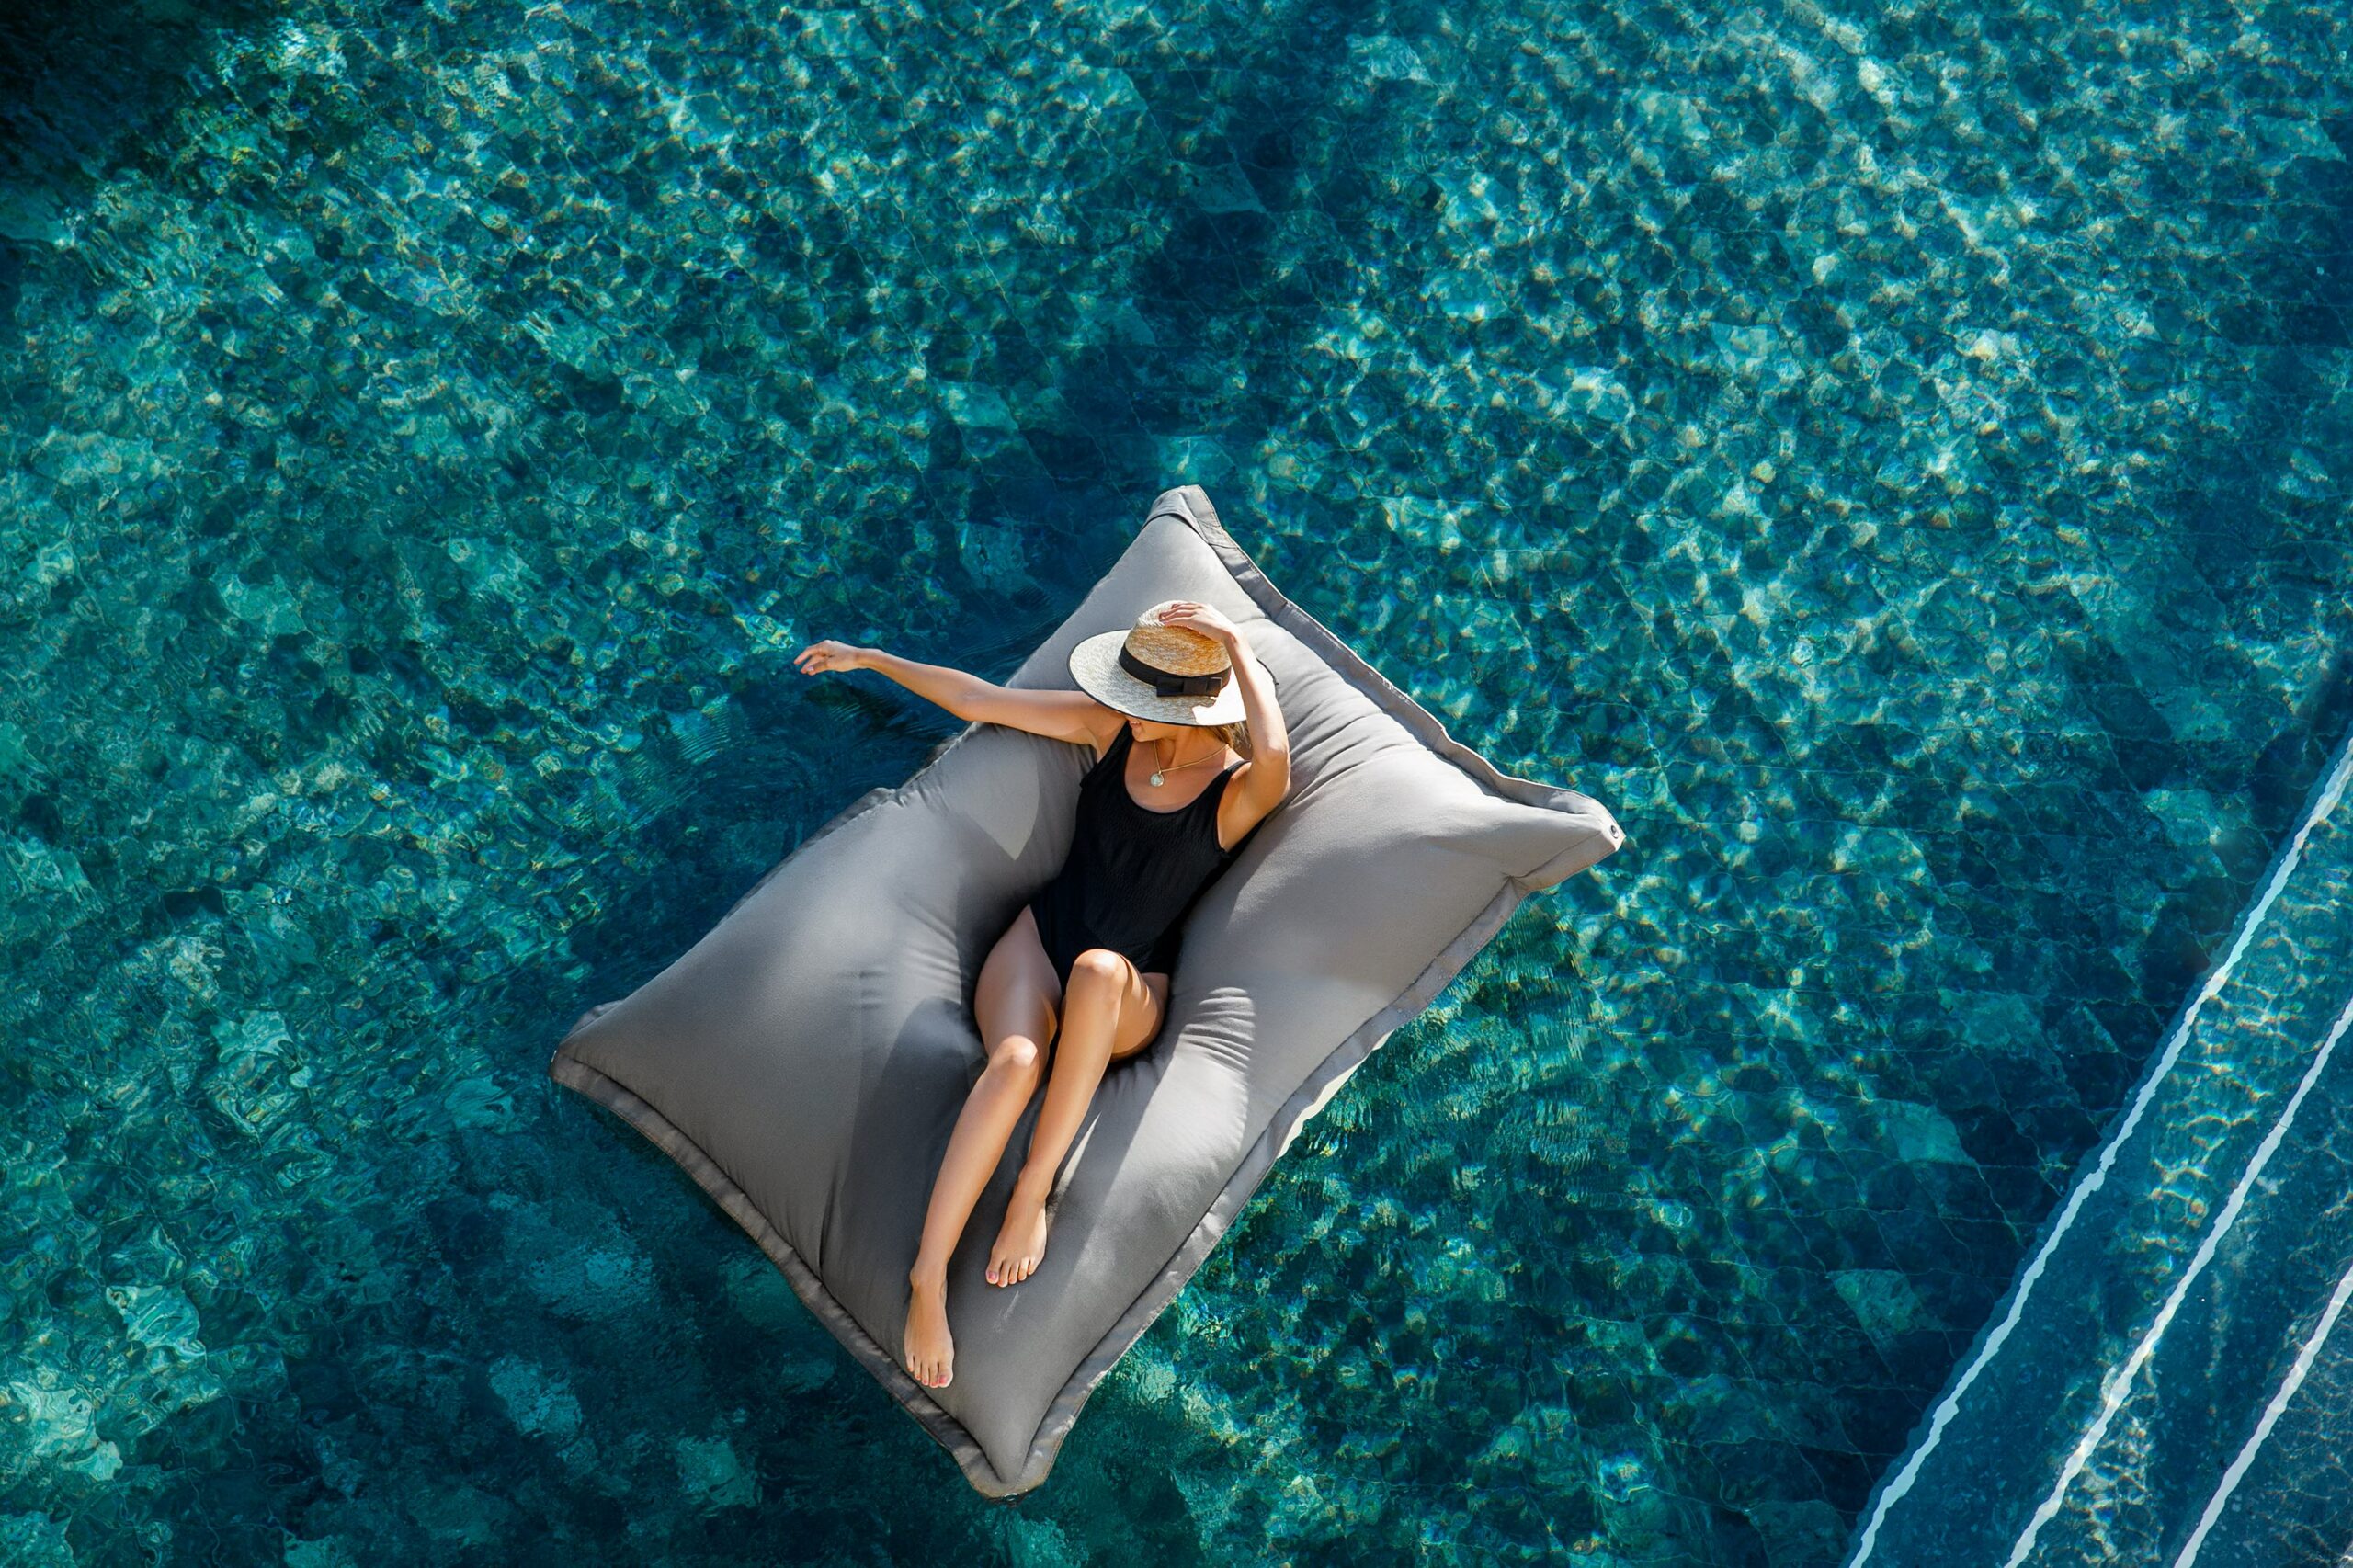 Aerial shot of a woman in a hat floating on an inflatable in a swimming pool